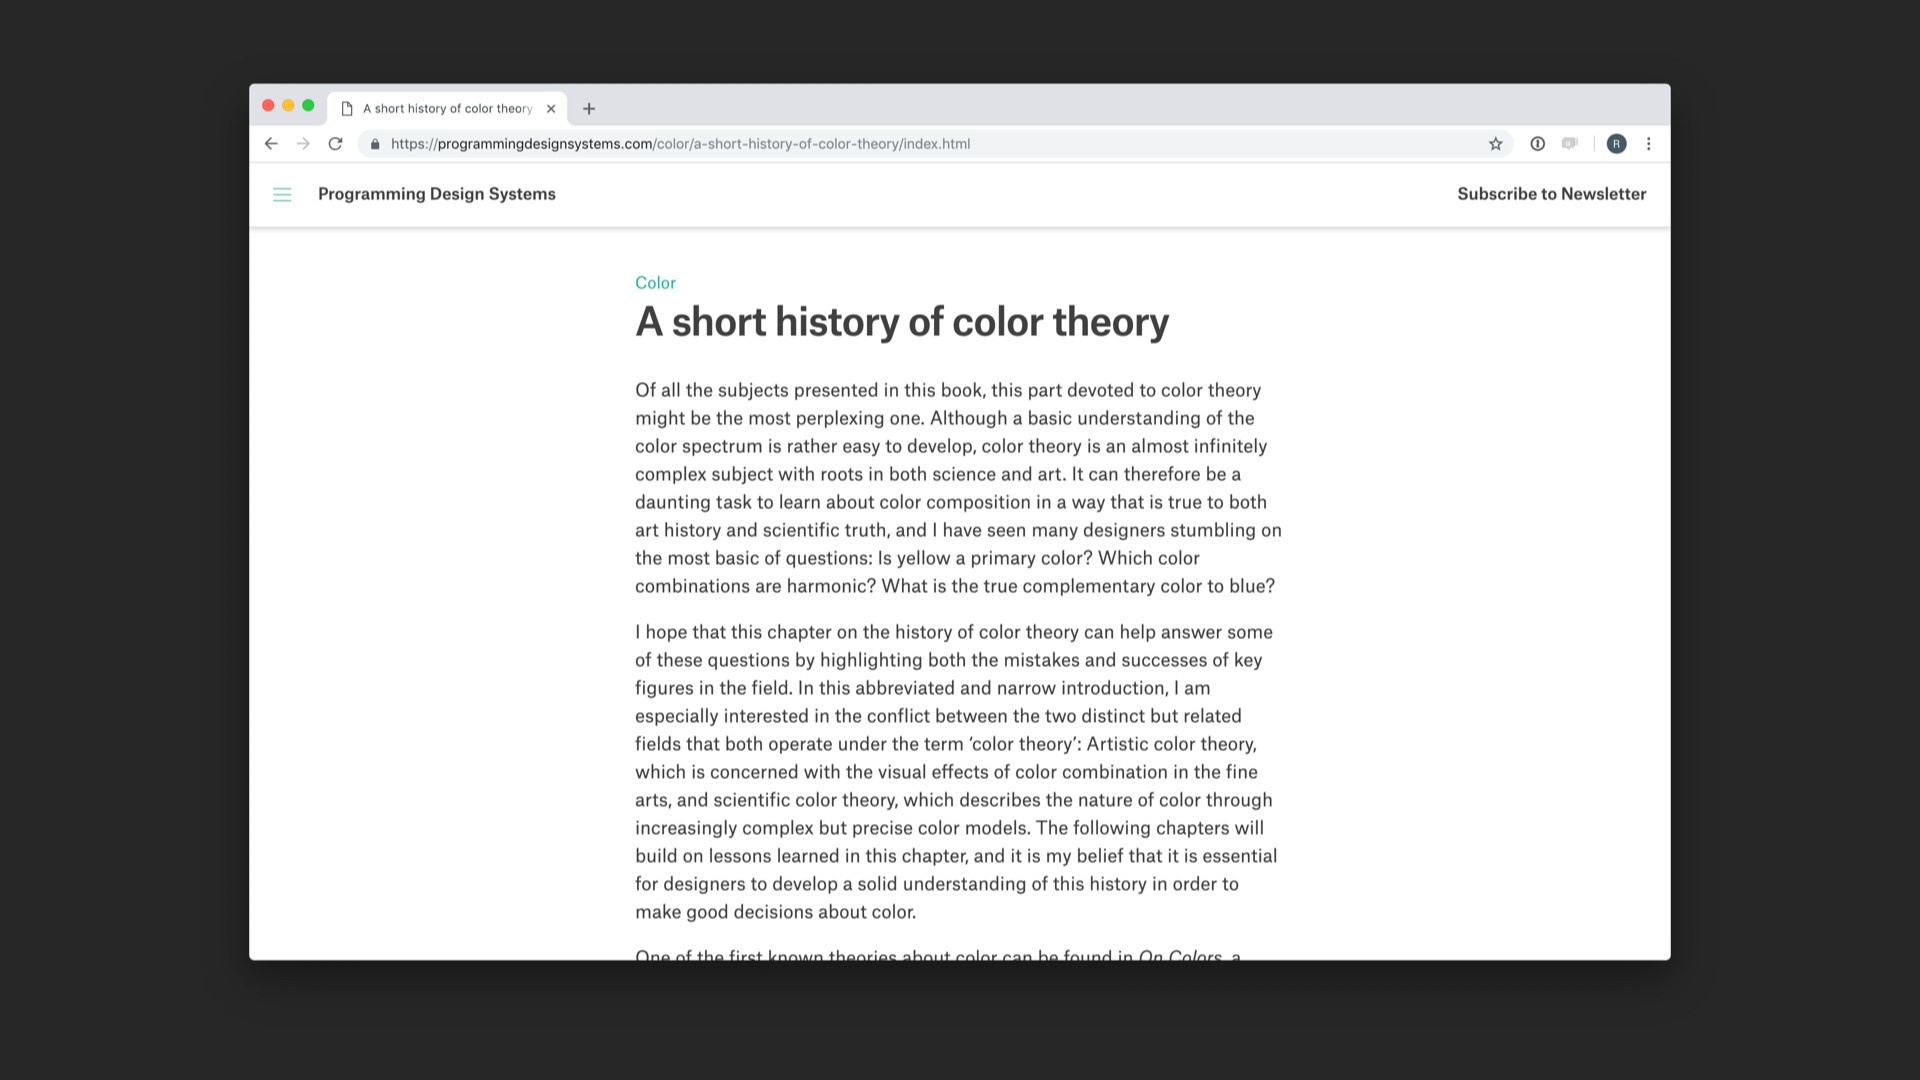 Screenshot of 'A short history of color theory' chapter of referenced website.